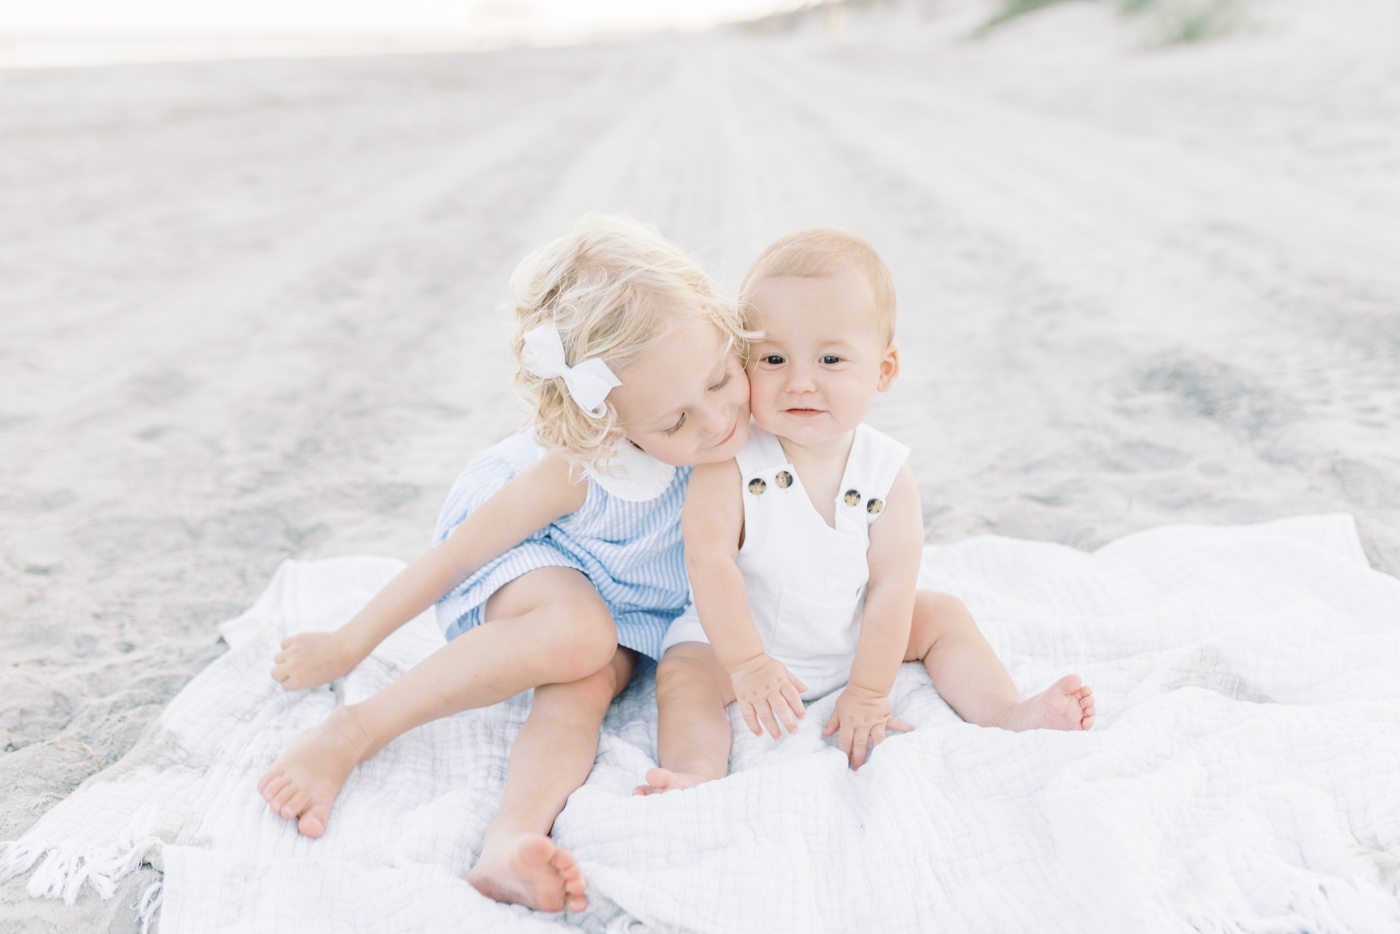 Sister snuggling her little brother on the beach | Photo by Caitlyn Motycka Photography.